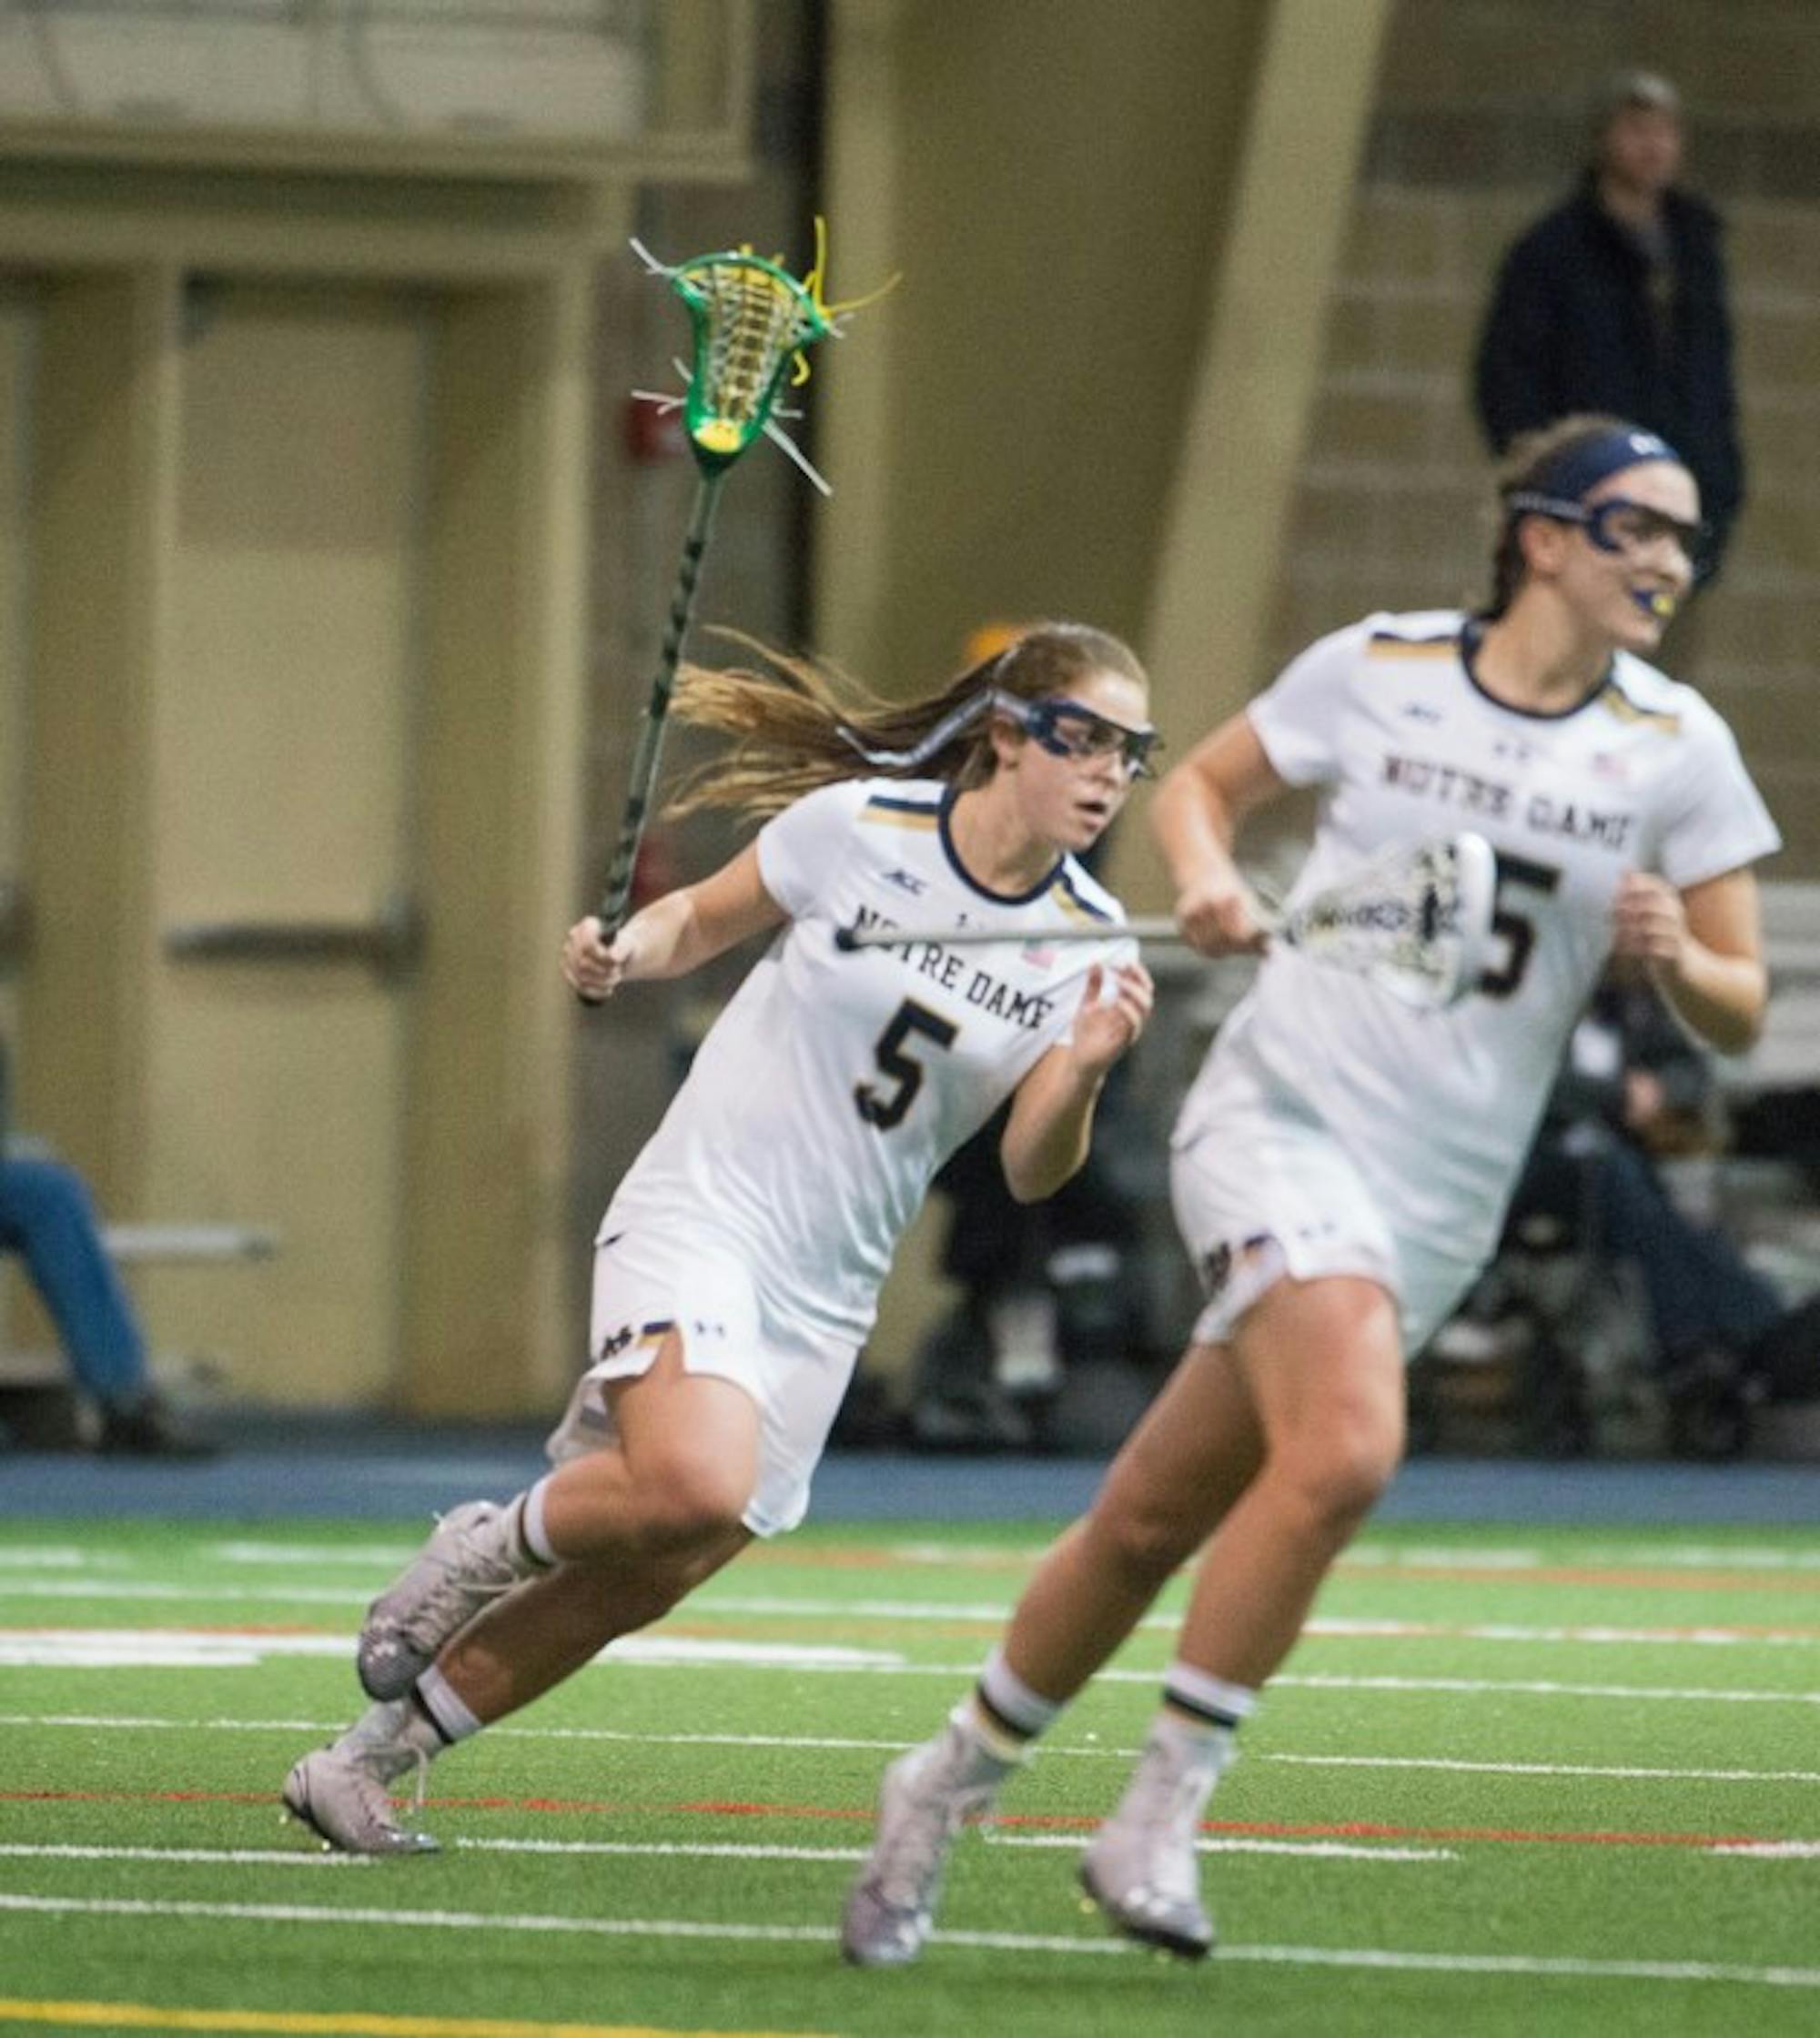 Irish attackers junior Rachel Sexton, left, and sophomore Cortney Fortunato sprint downfield Feb. 15 during a win over Detroit. Both players tallied five goals yesterday in an 18-8 victory over Marquette.